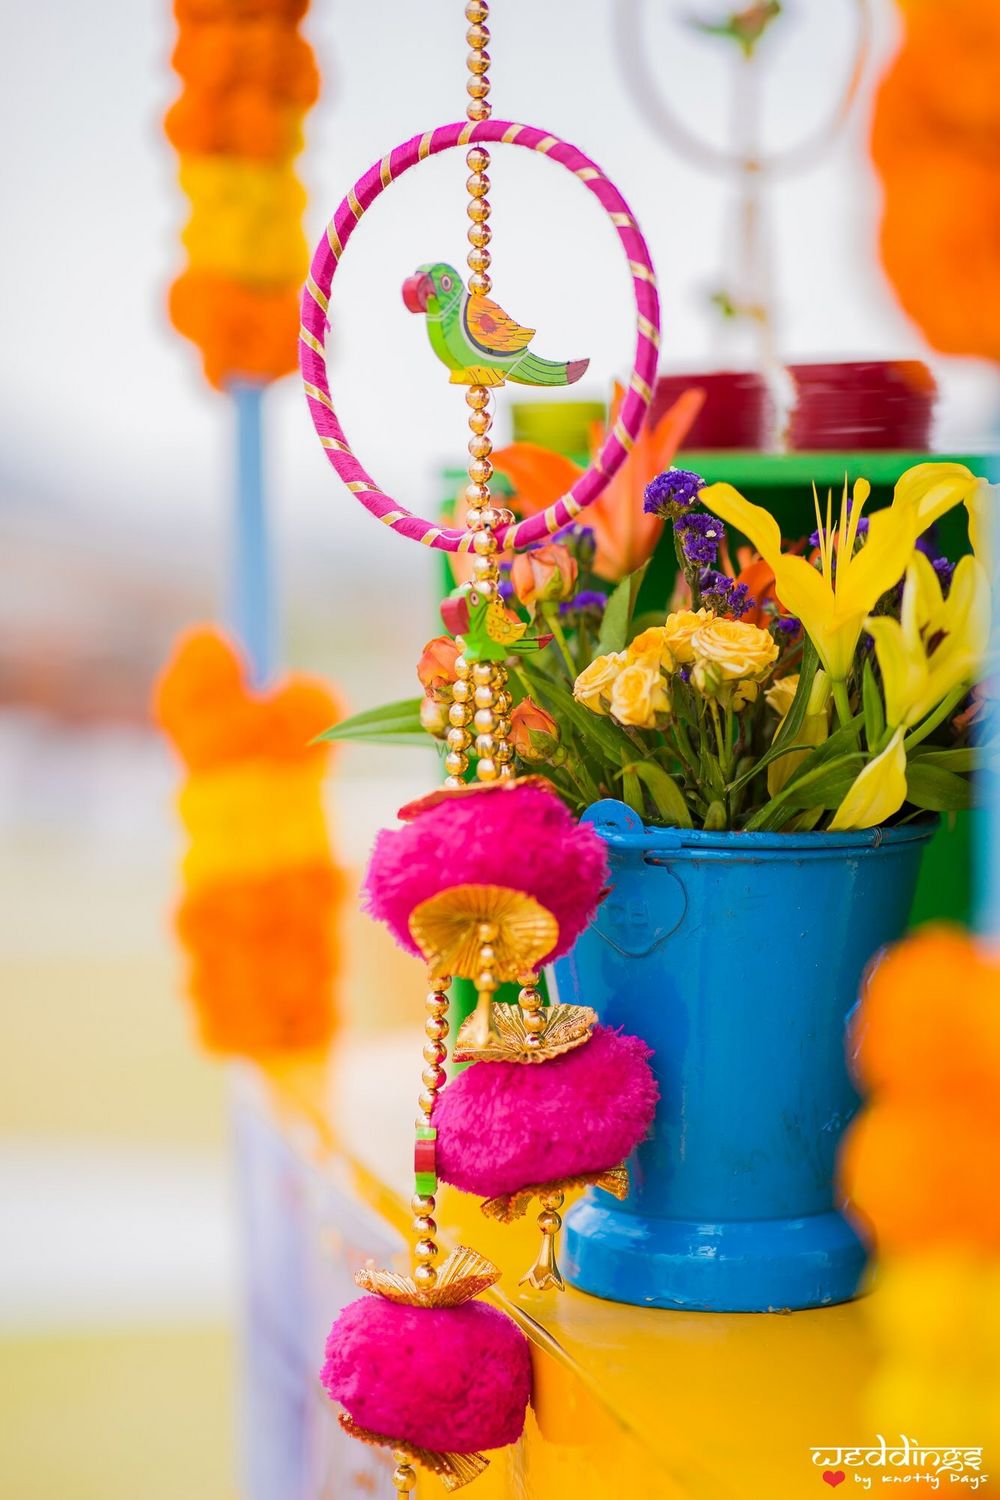 Photo of Hanging parrots in decor idea for mehendi